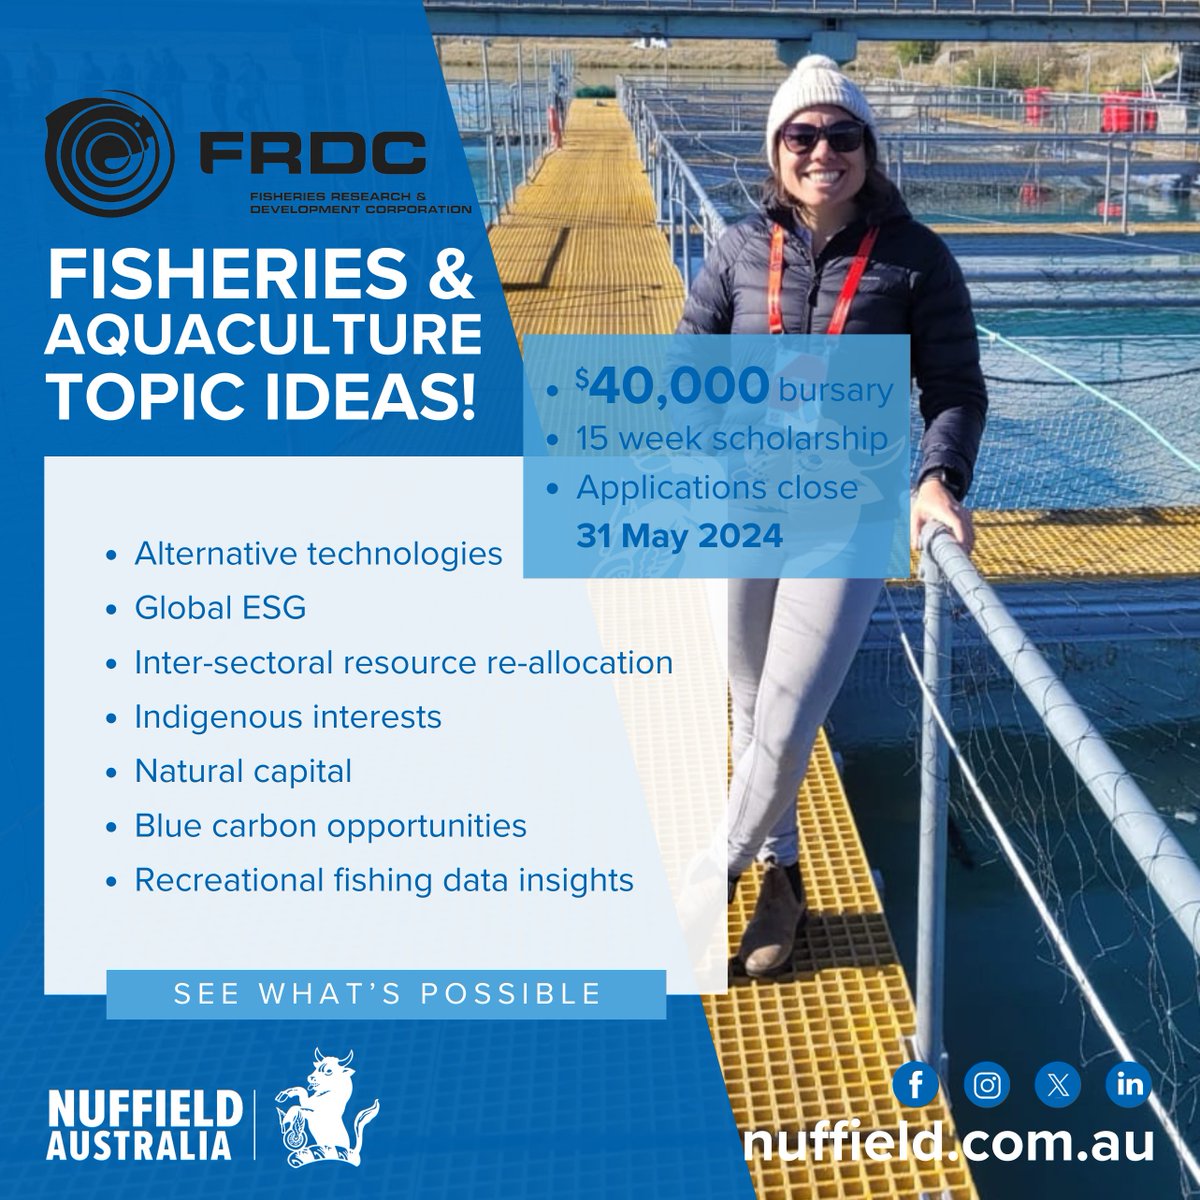 ARE YOU directly involved in fisheries & aquaculture in Australia, if so apply for a 2025 Nuffield Scholarship, generously supported by @FRDCAustralia 

Apply today: nuffield.com.au/how-to-apply

#nuffieldag #aussiefarmers #futurefarmers #fisheries #aquaculture